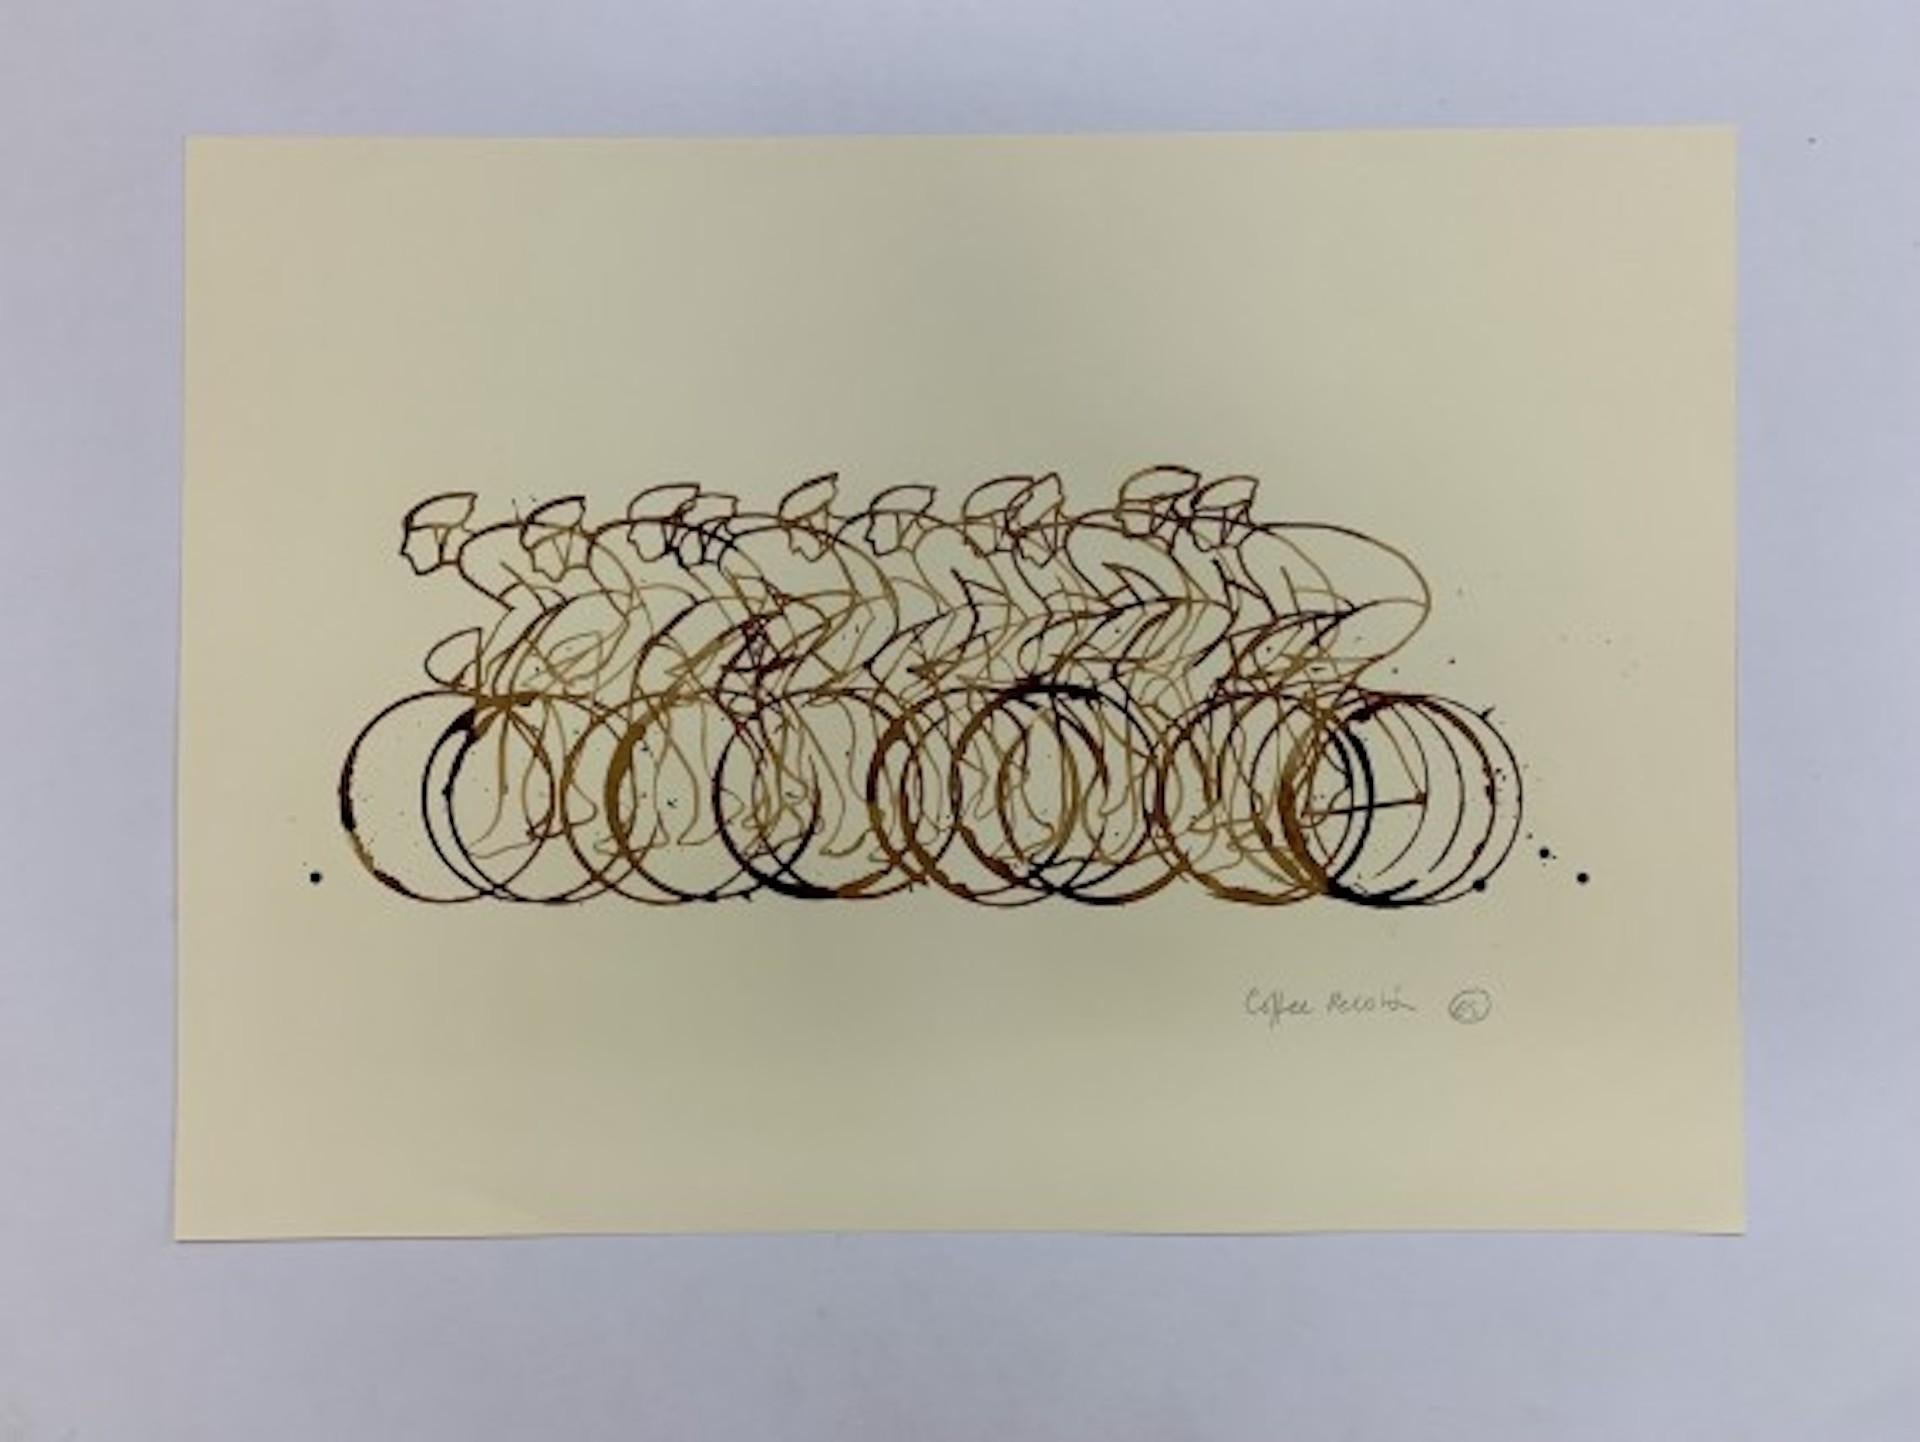 Coffee Peloton Series XVIII by Eliza Southwood [2021]
original

Coffee on paper

Image size: H:41.5 cm x W:59 cm

Complete Size of Unframed Work: H:41.5 cm x W:59 cm x D:0.1cm

Sold Unframed

Please note that insitu images are purely an indication